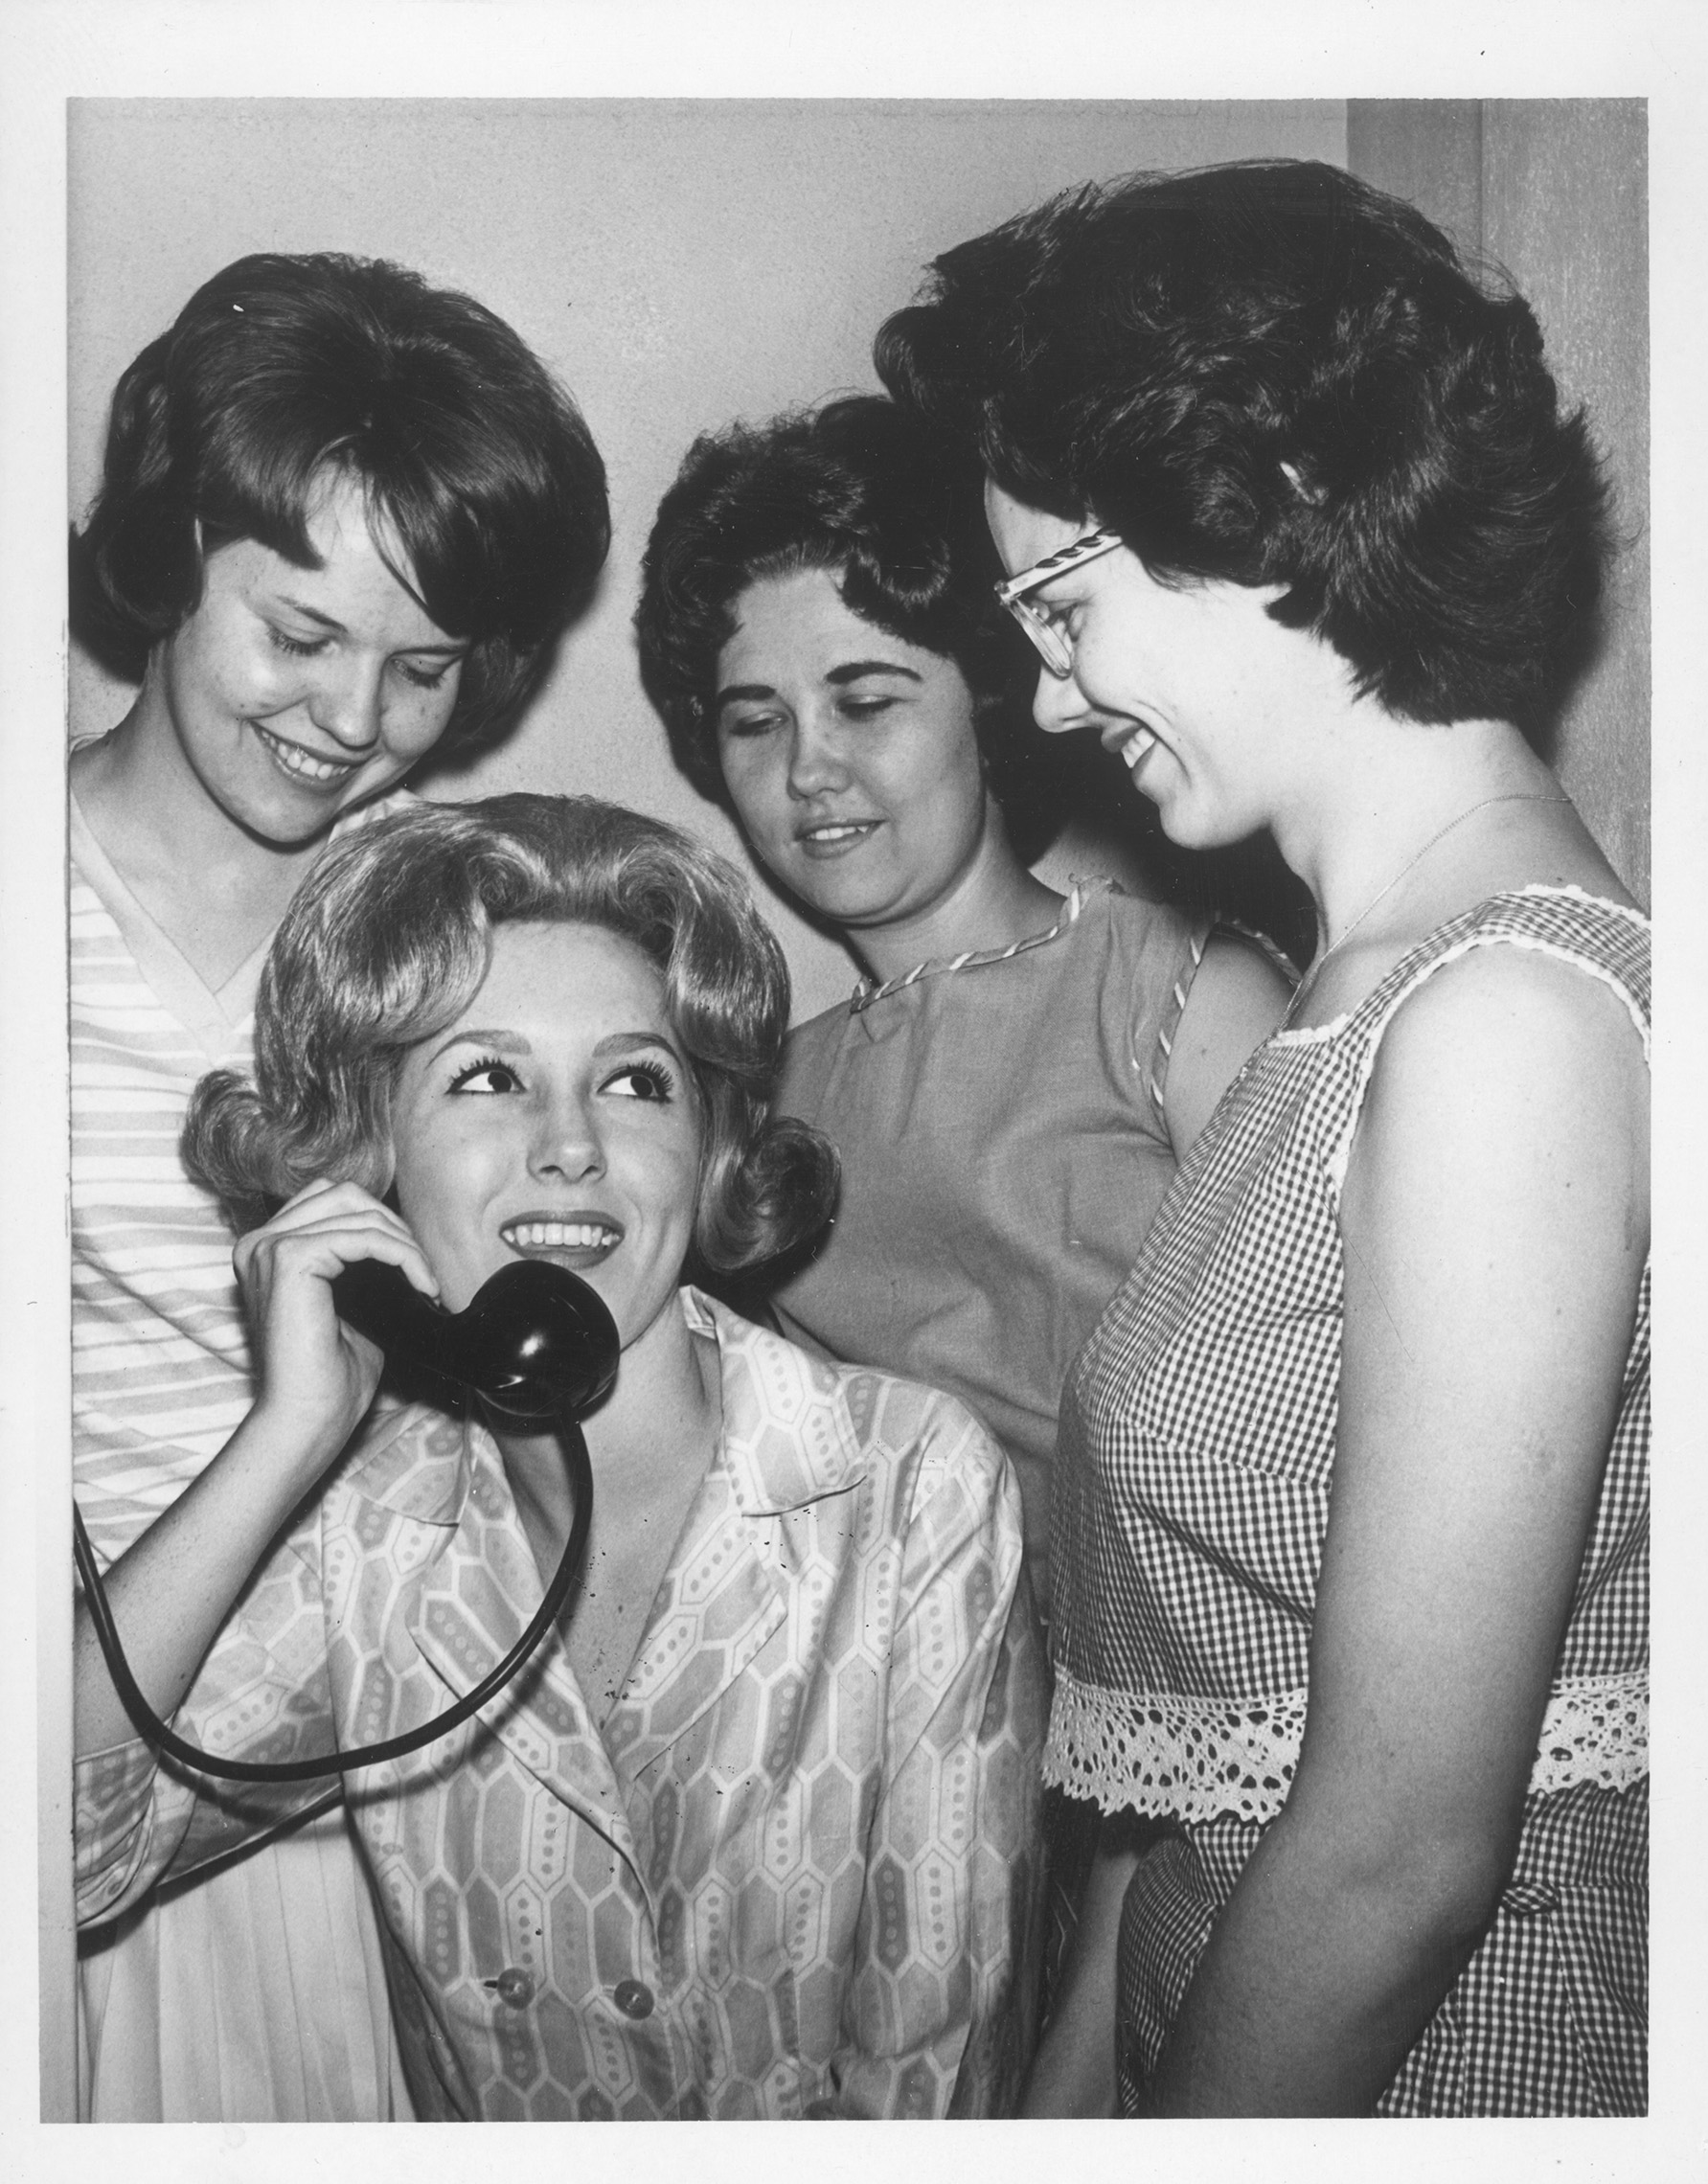 From Arlington State College. Three women stand while one woman speaks into a telephone receiver. Approximately 1950s or 1960s.